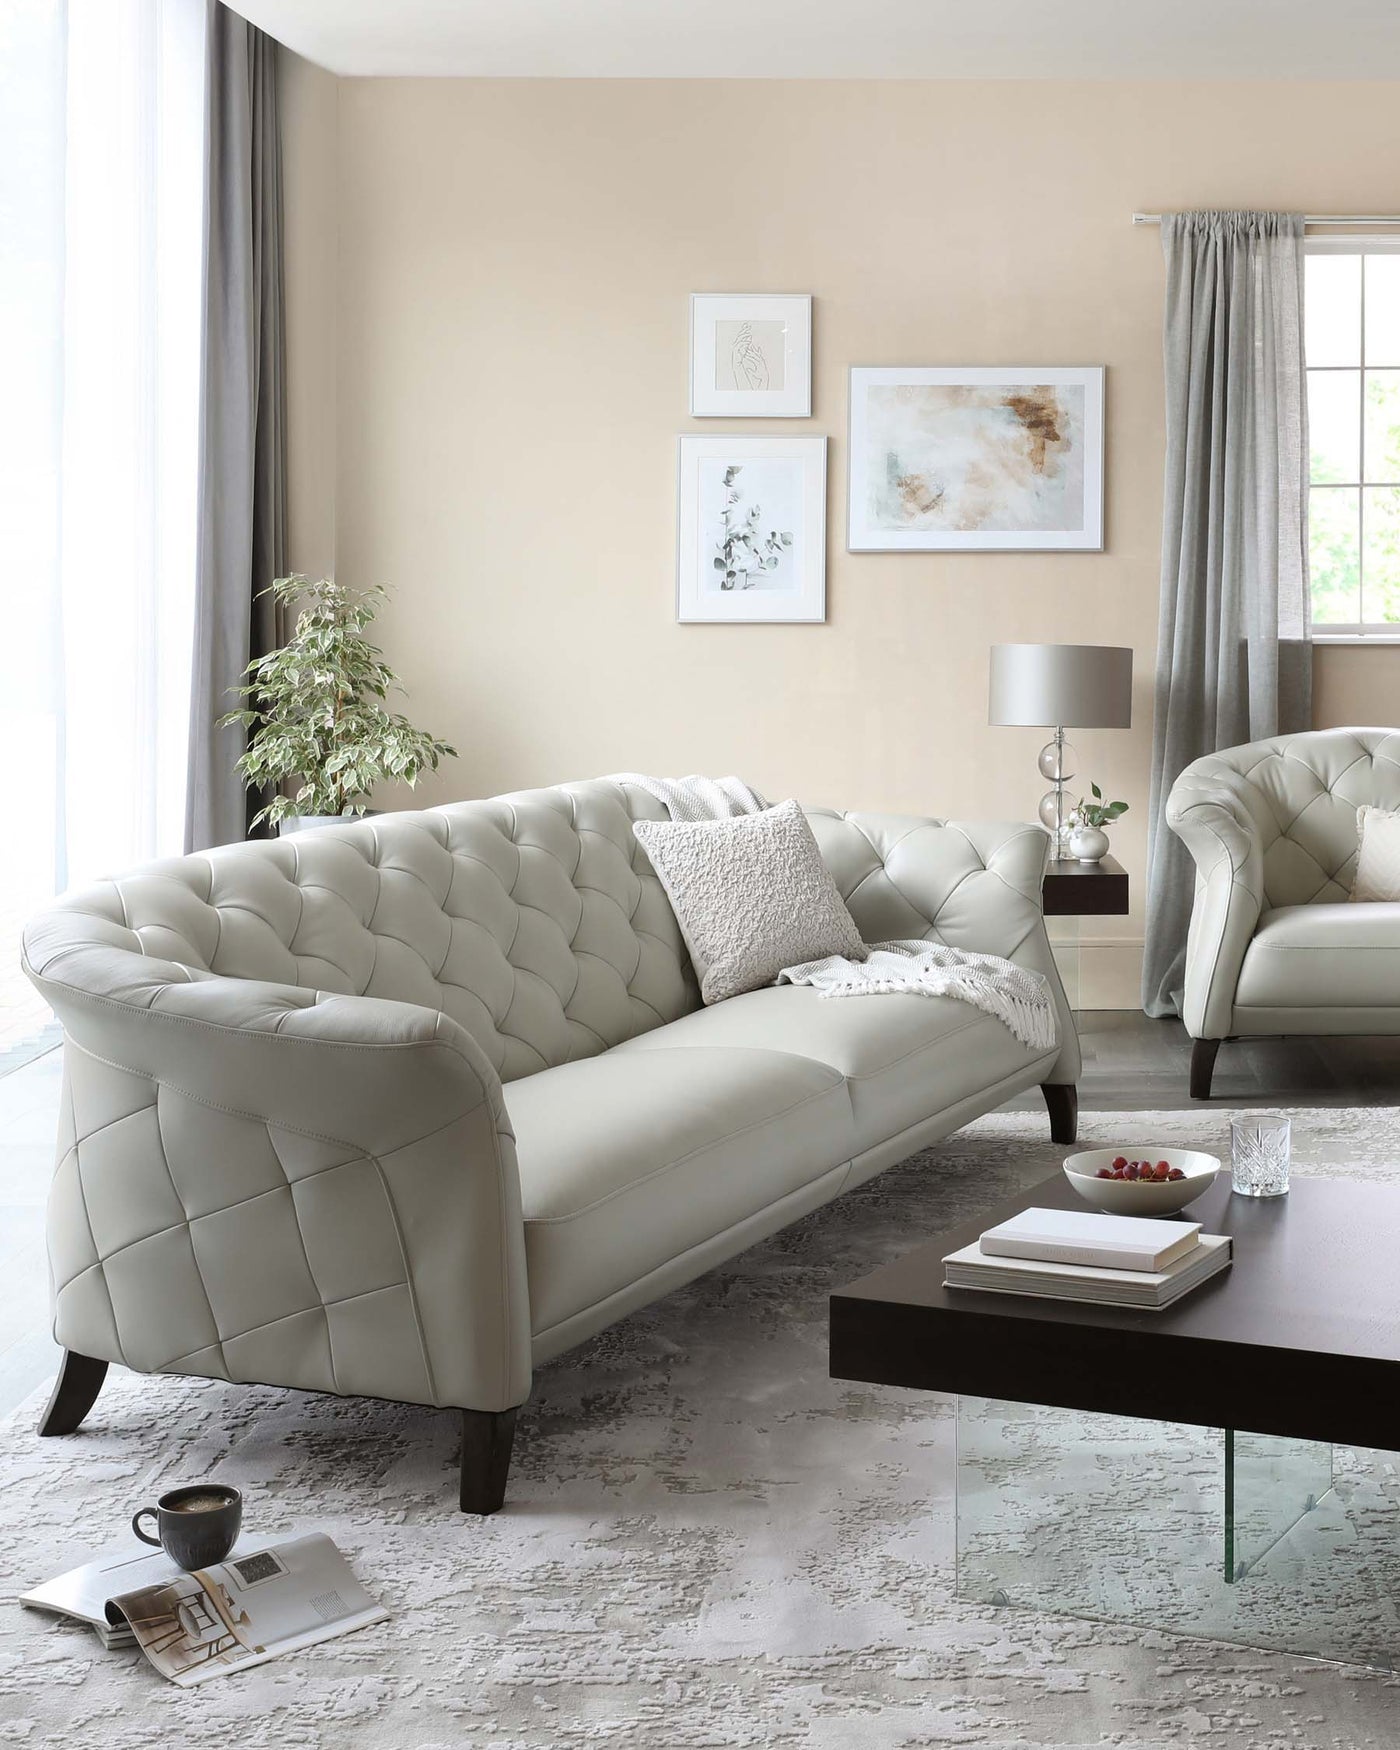 Elegant modern living room set featuring a tufted ivory sofa with curved armrests, matching armchair, dark rectangular wooden coffee table with a glass insert, and coordinating side table with a lamp, all arranged on a distressed cream and grey area rug.